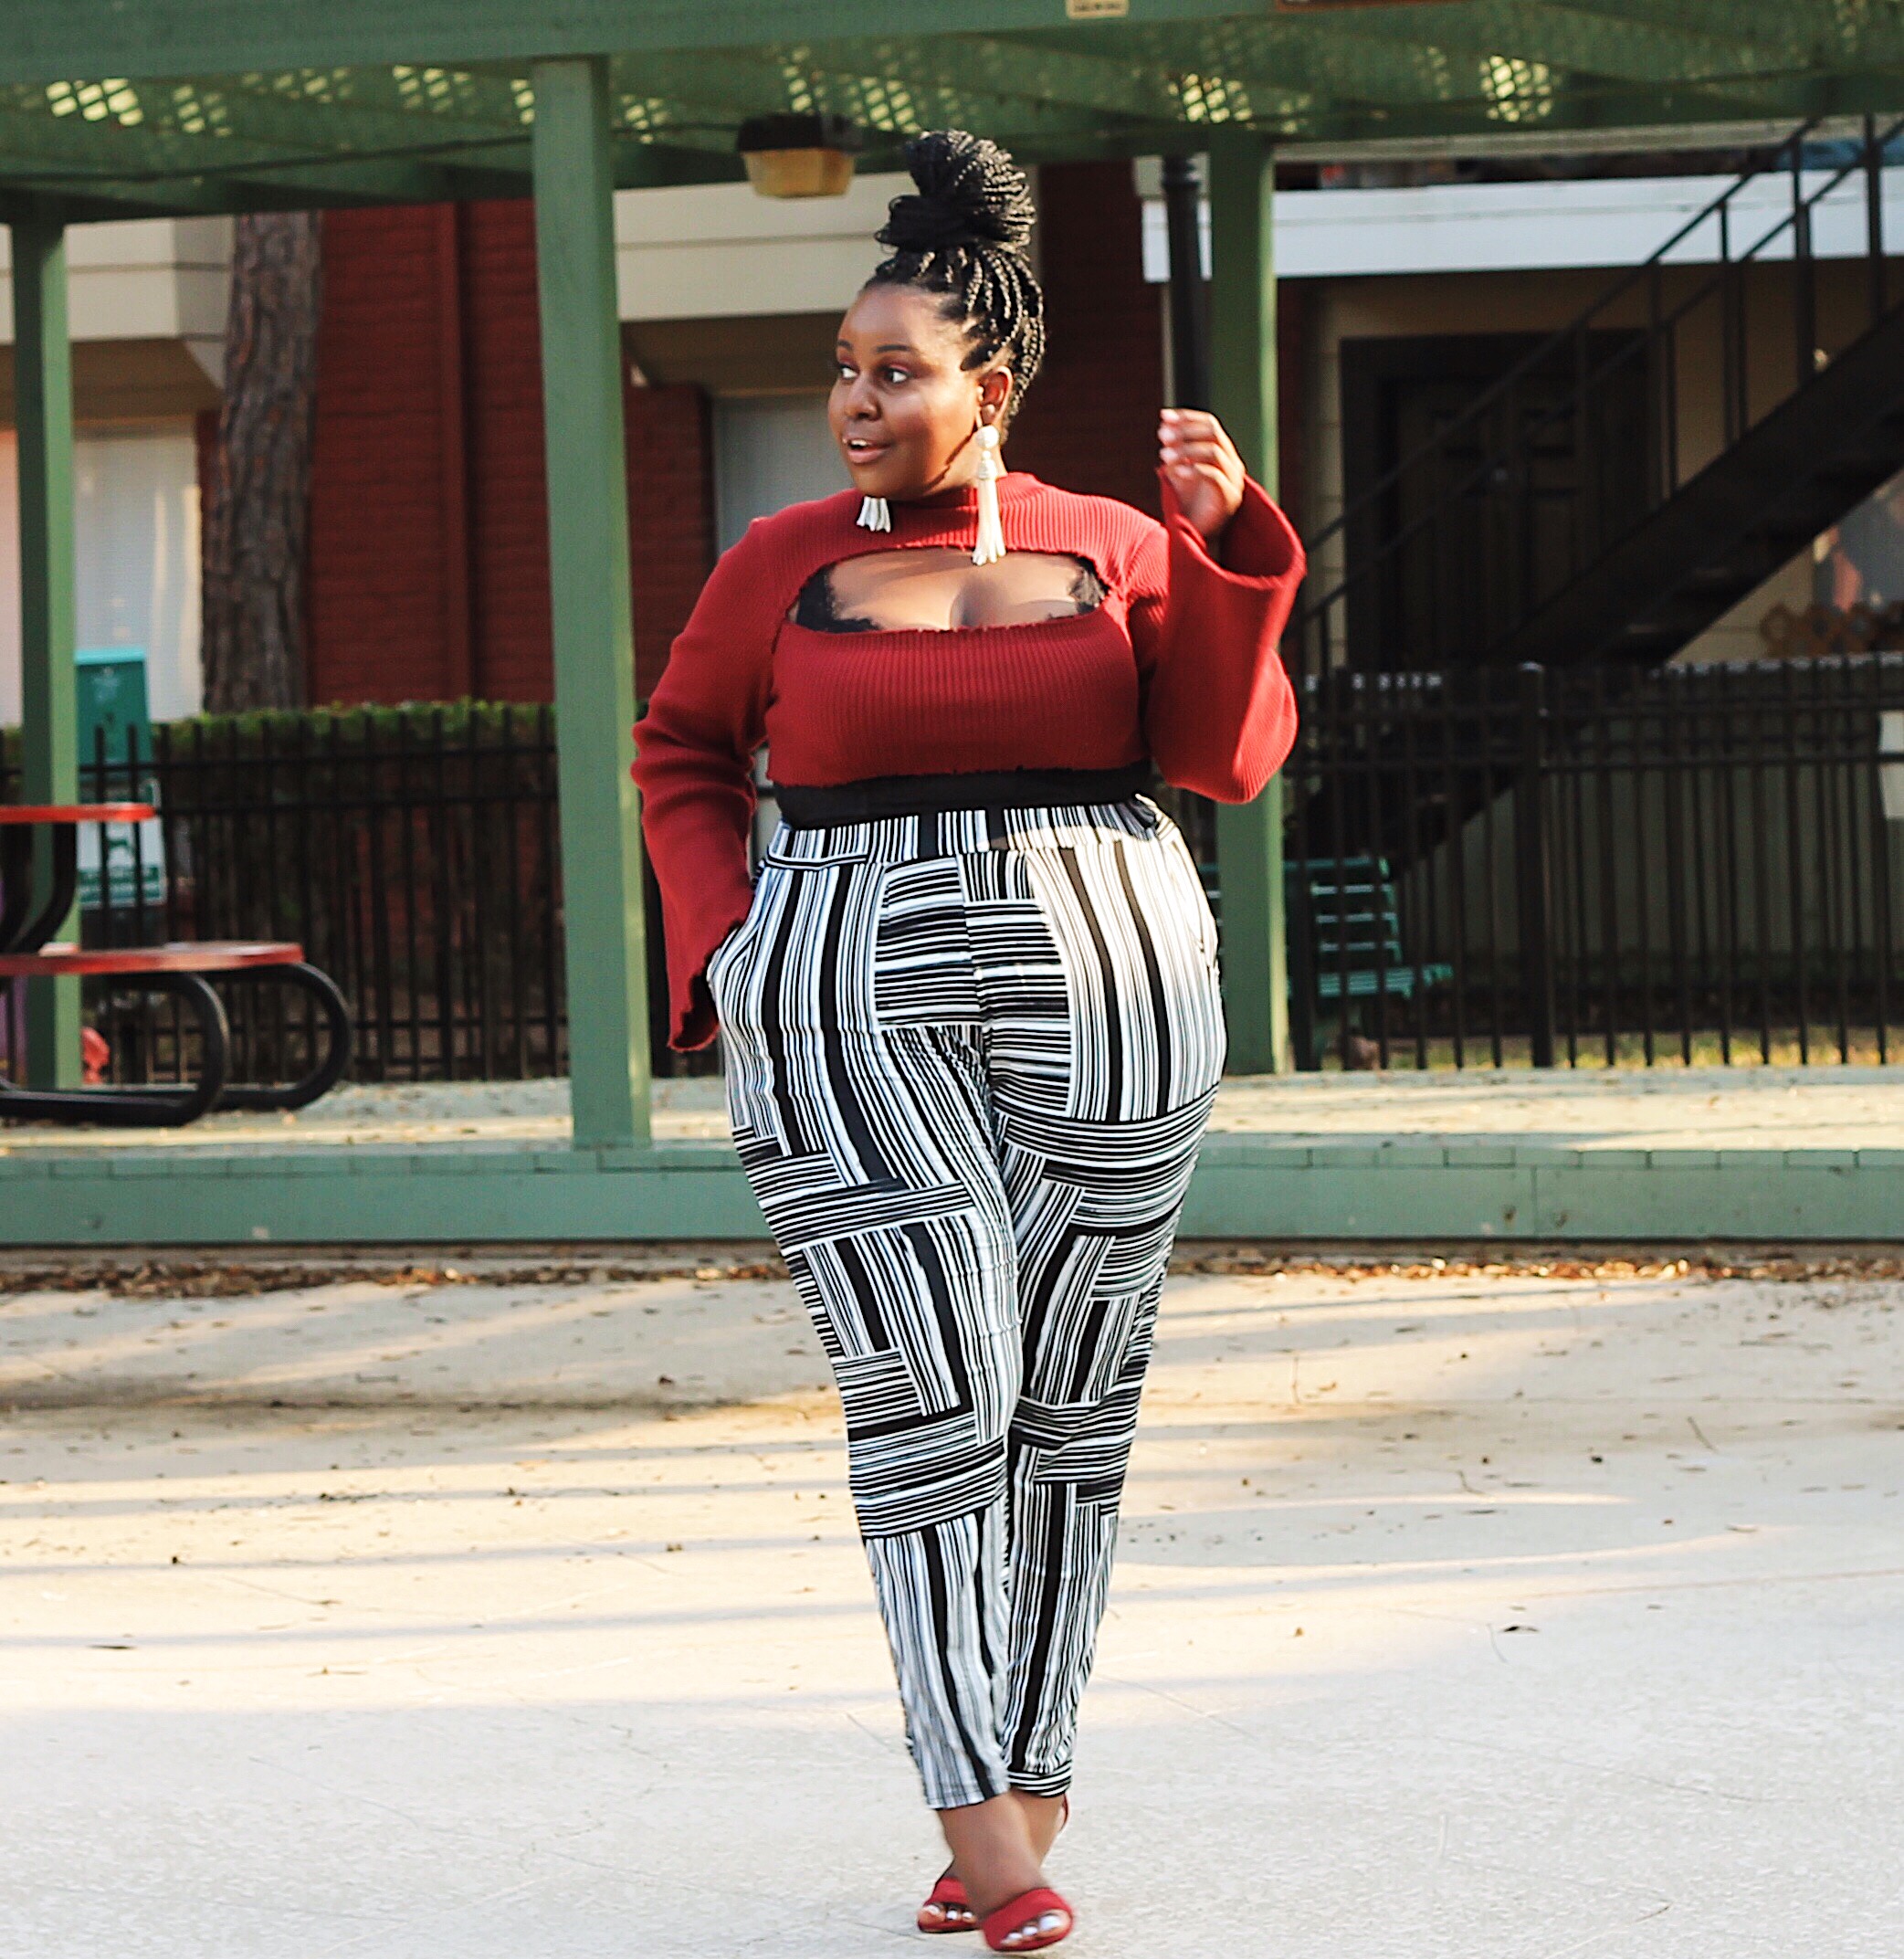 plus size fashion blogs 2017, beautiful curvy girls, how to fill the eye brow of a dark skin, beautiful plus size dark skin girls, plus size black bloggers, clothes for curvy girls, curvy girl fashion clothing, plus blog, plus size fashion tips, plus size women blog, curvy women fashion, plus blog, curvy girl fashion blog, style plus curves, plus size fashion instagram, curvy girl blog, bbw blog, plus size street fashion, plus size beauty blog, plus size fashion ideas, curvy girl summer outfits, plus size fashion magazine, plus fashion bloggers, boohoo, rebdolls printed pants